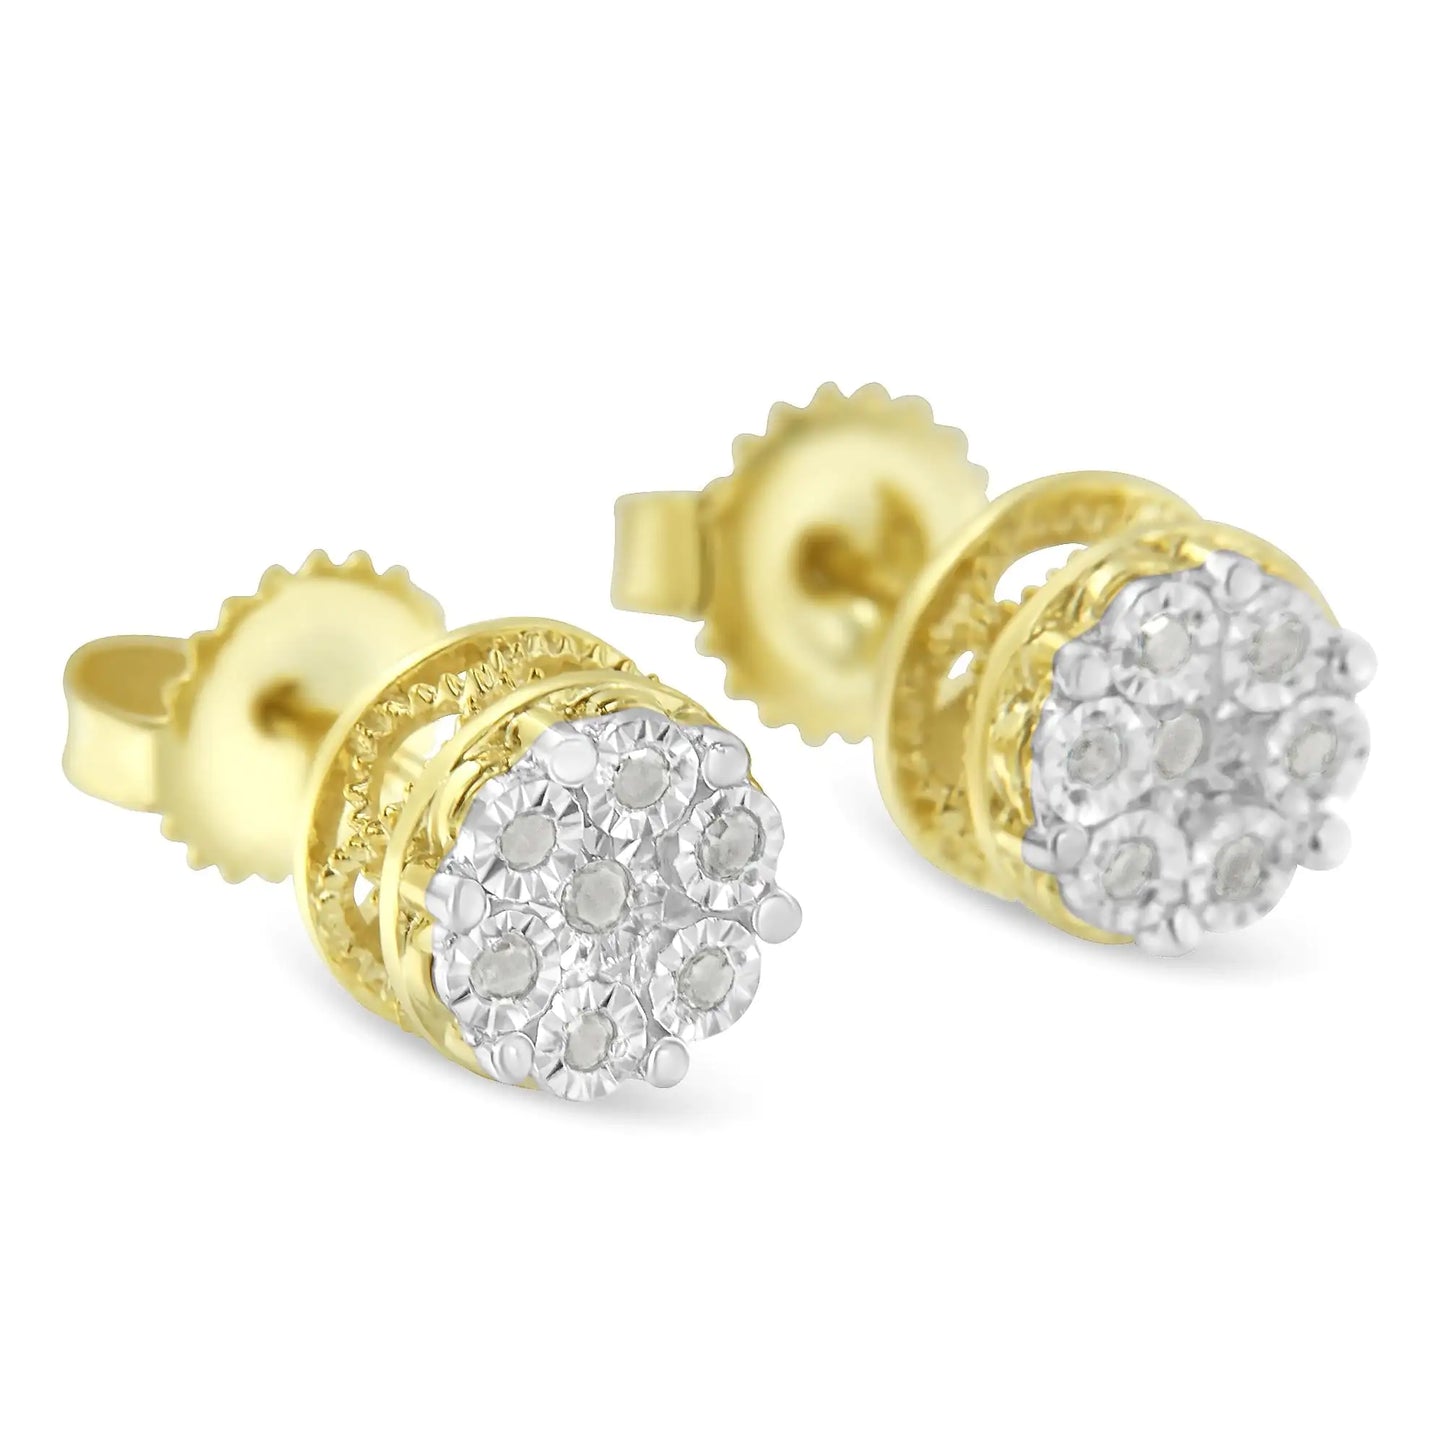 14K Yellow Gold Plated .925 Sterling Silver 1/7 Cttw Diamond Miracle Set Stud Earrings (I-J Color, I3 Promo Clarity)